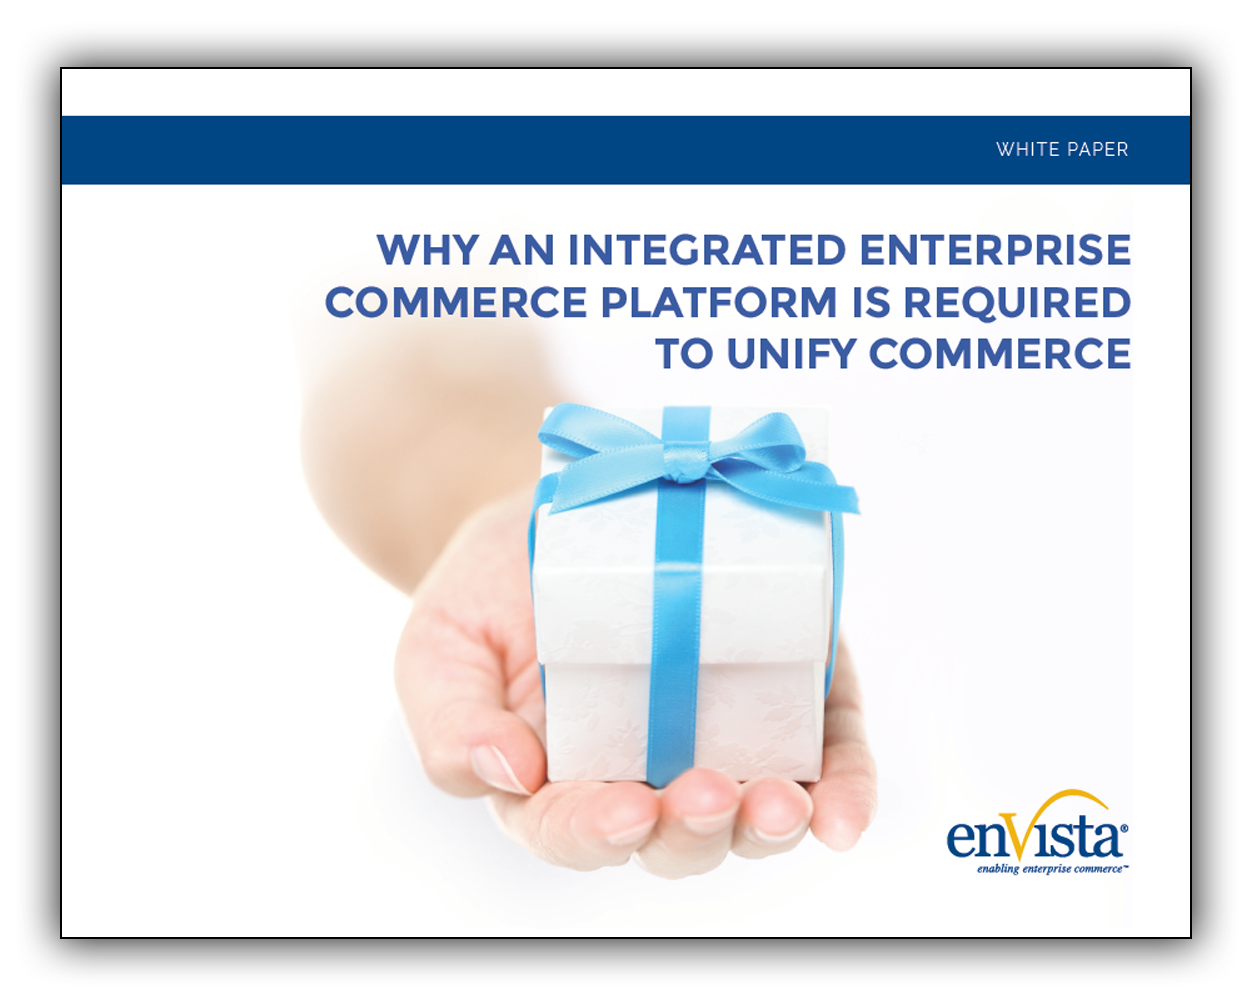 Image_why-an-integrated-enterprise-commerce-platform-is-required-to-unify-commerce-1.png